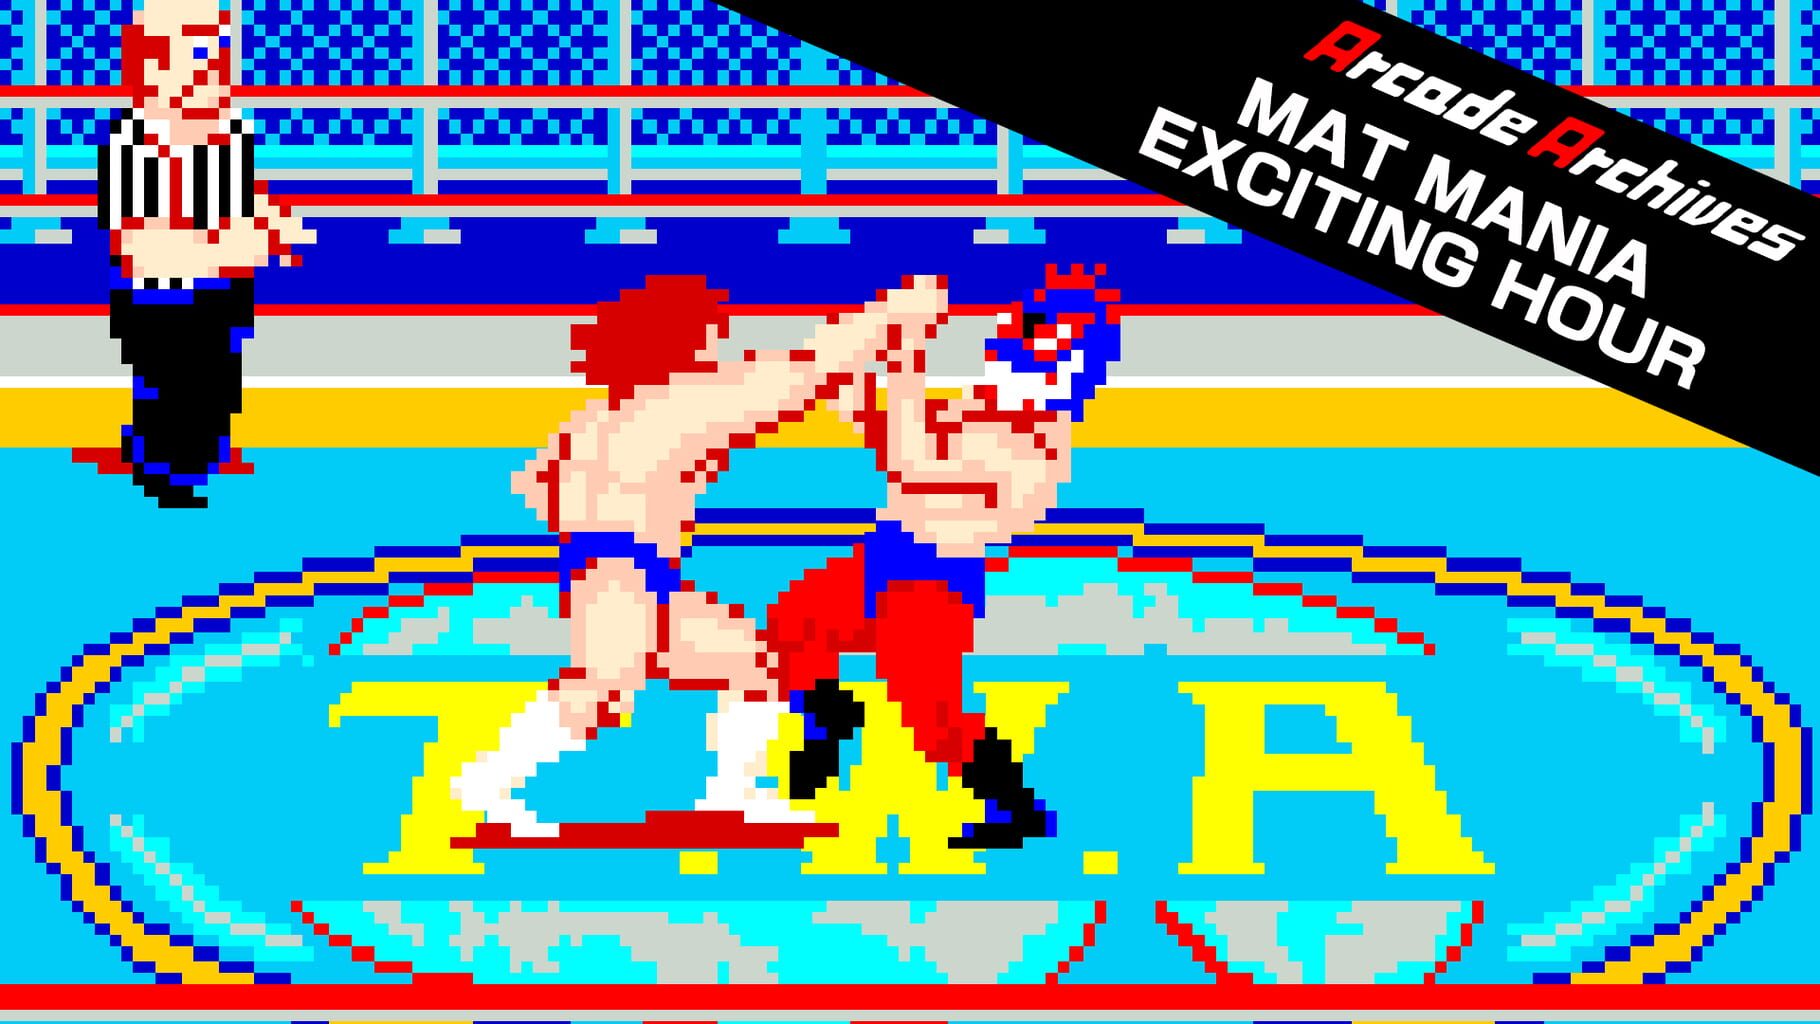 Arte - Arcade Archives: Mat Mania Exciting Hour